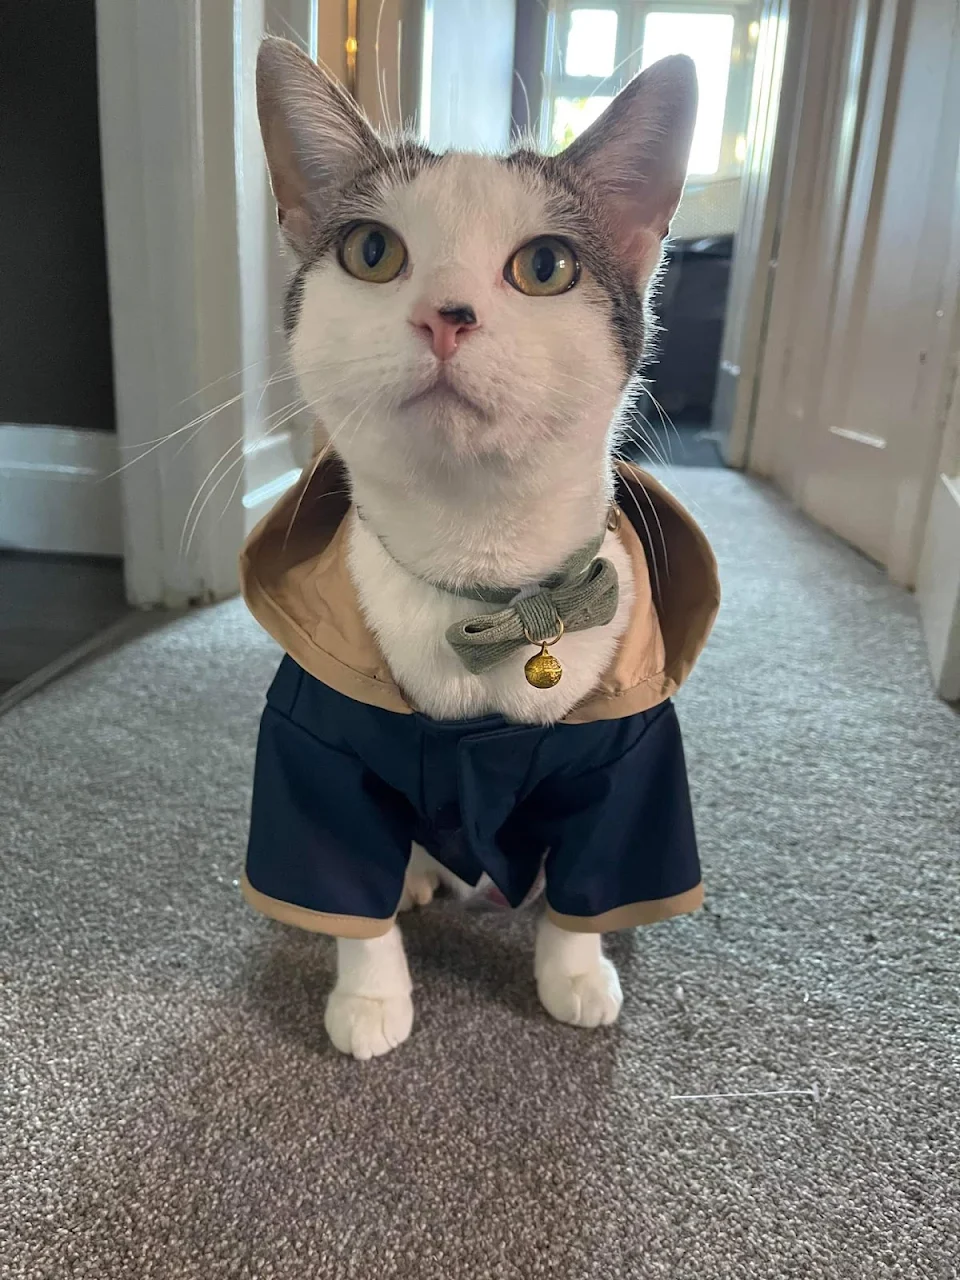 Little meow all dressed up